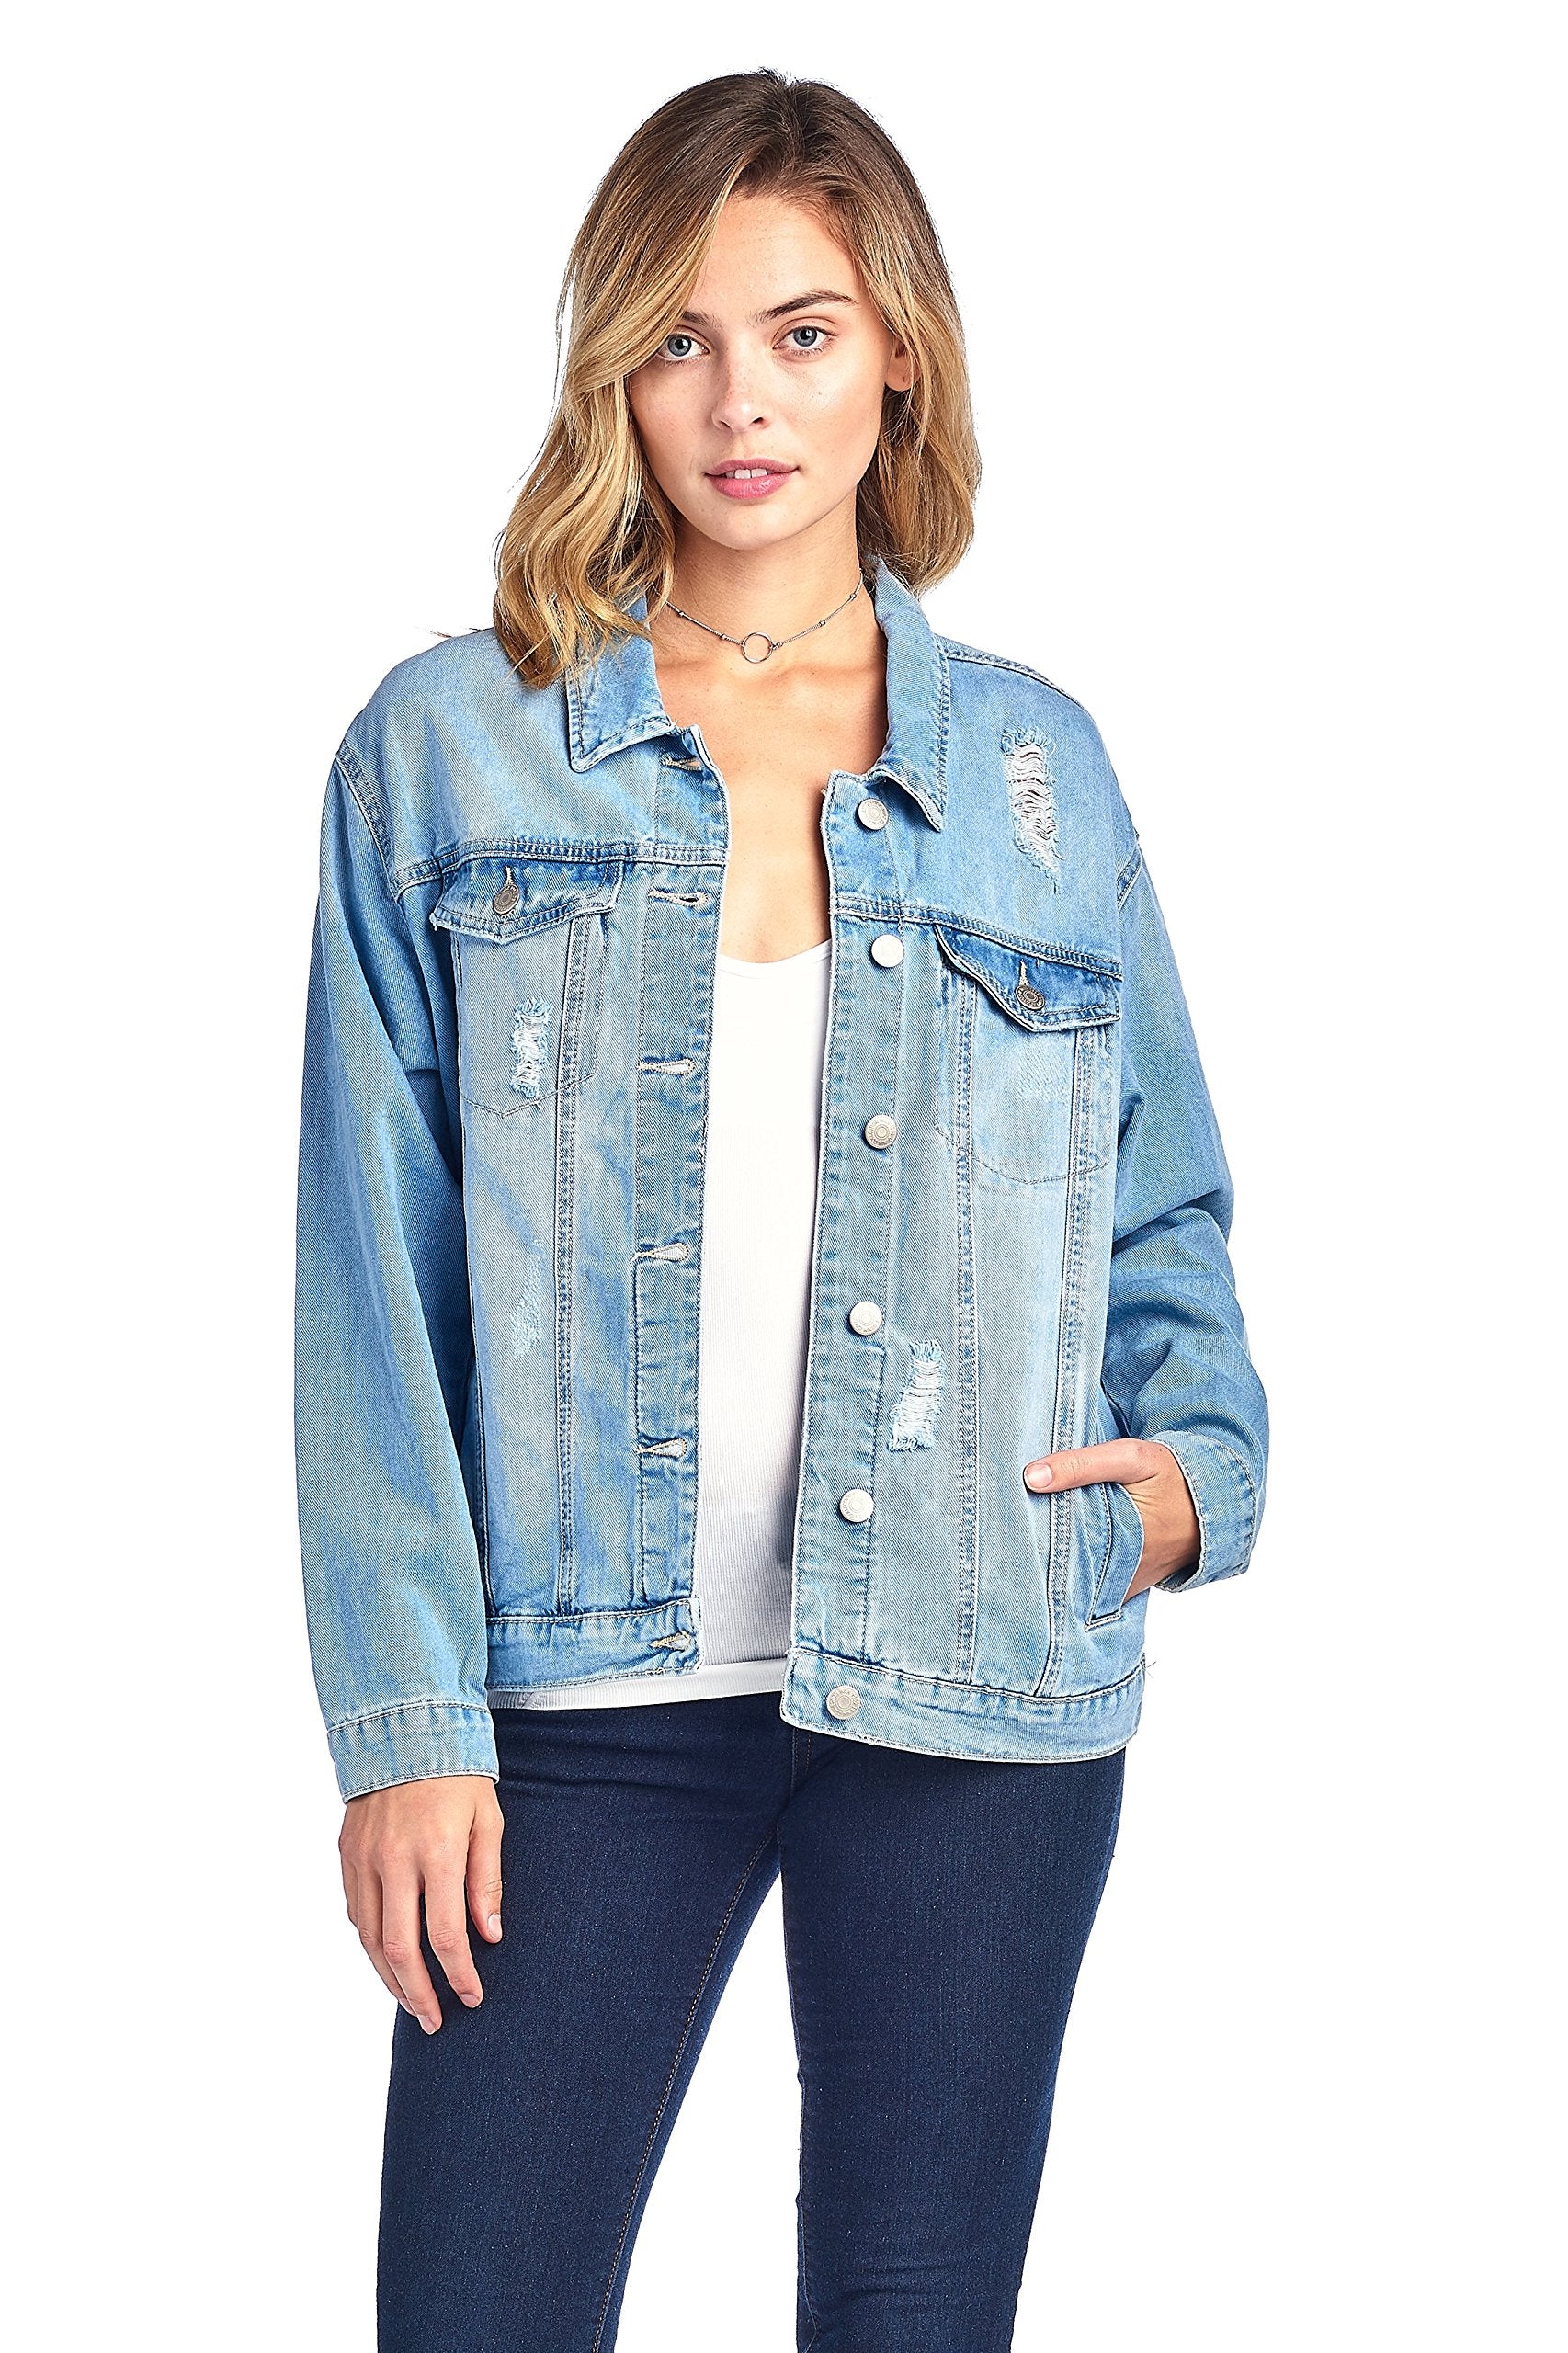 Classic Long Over Sized Denim Distress Buttoned Front Long Sleeve Basic Collar Jacket